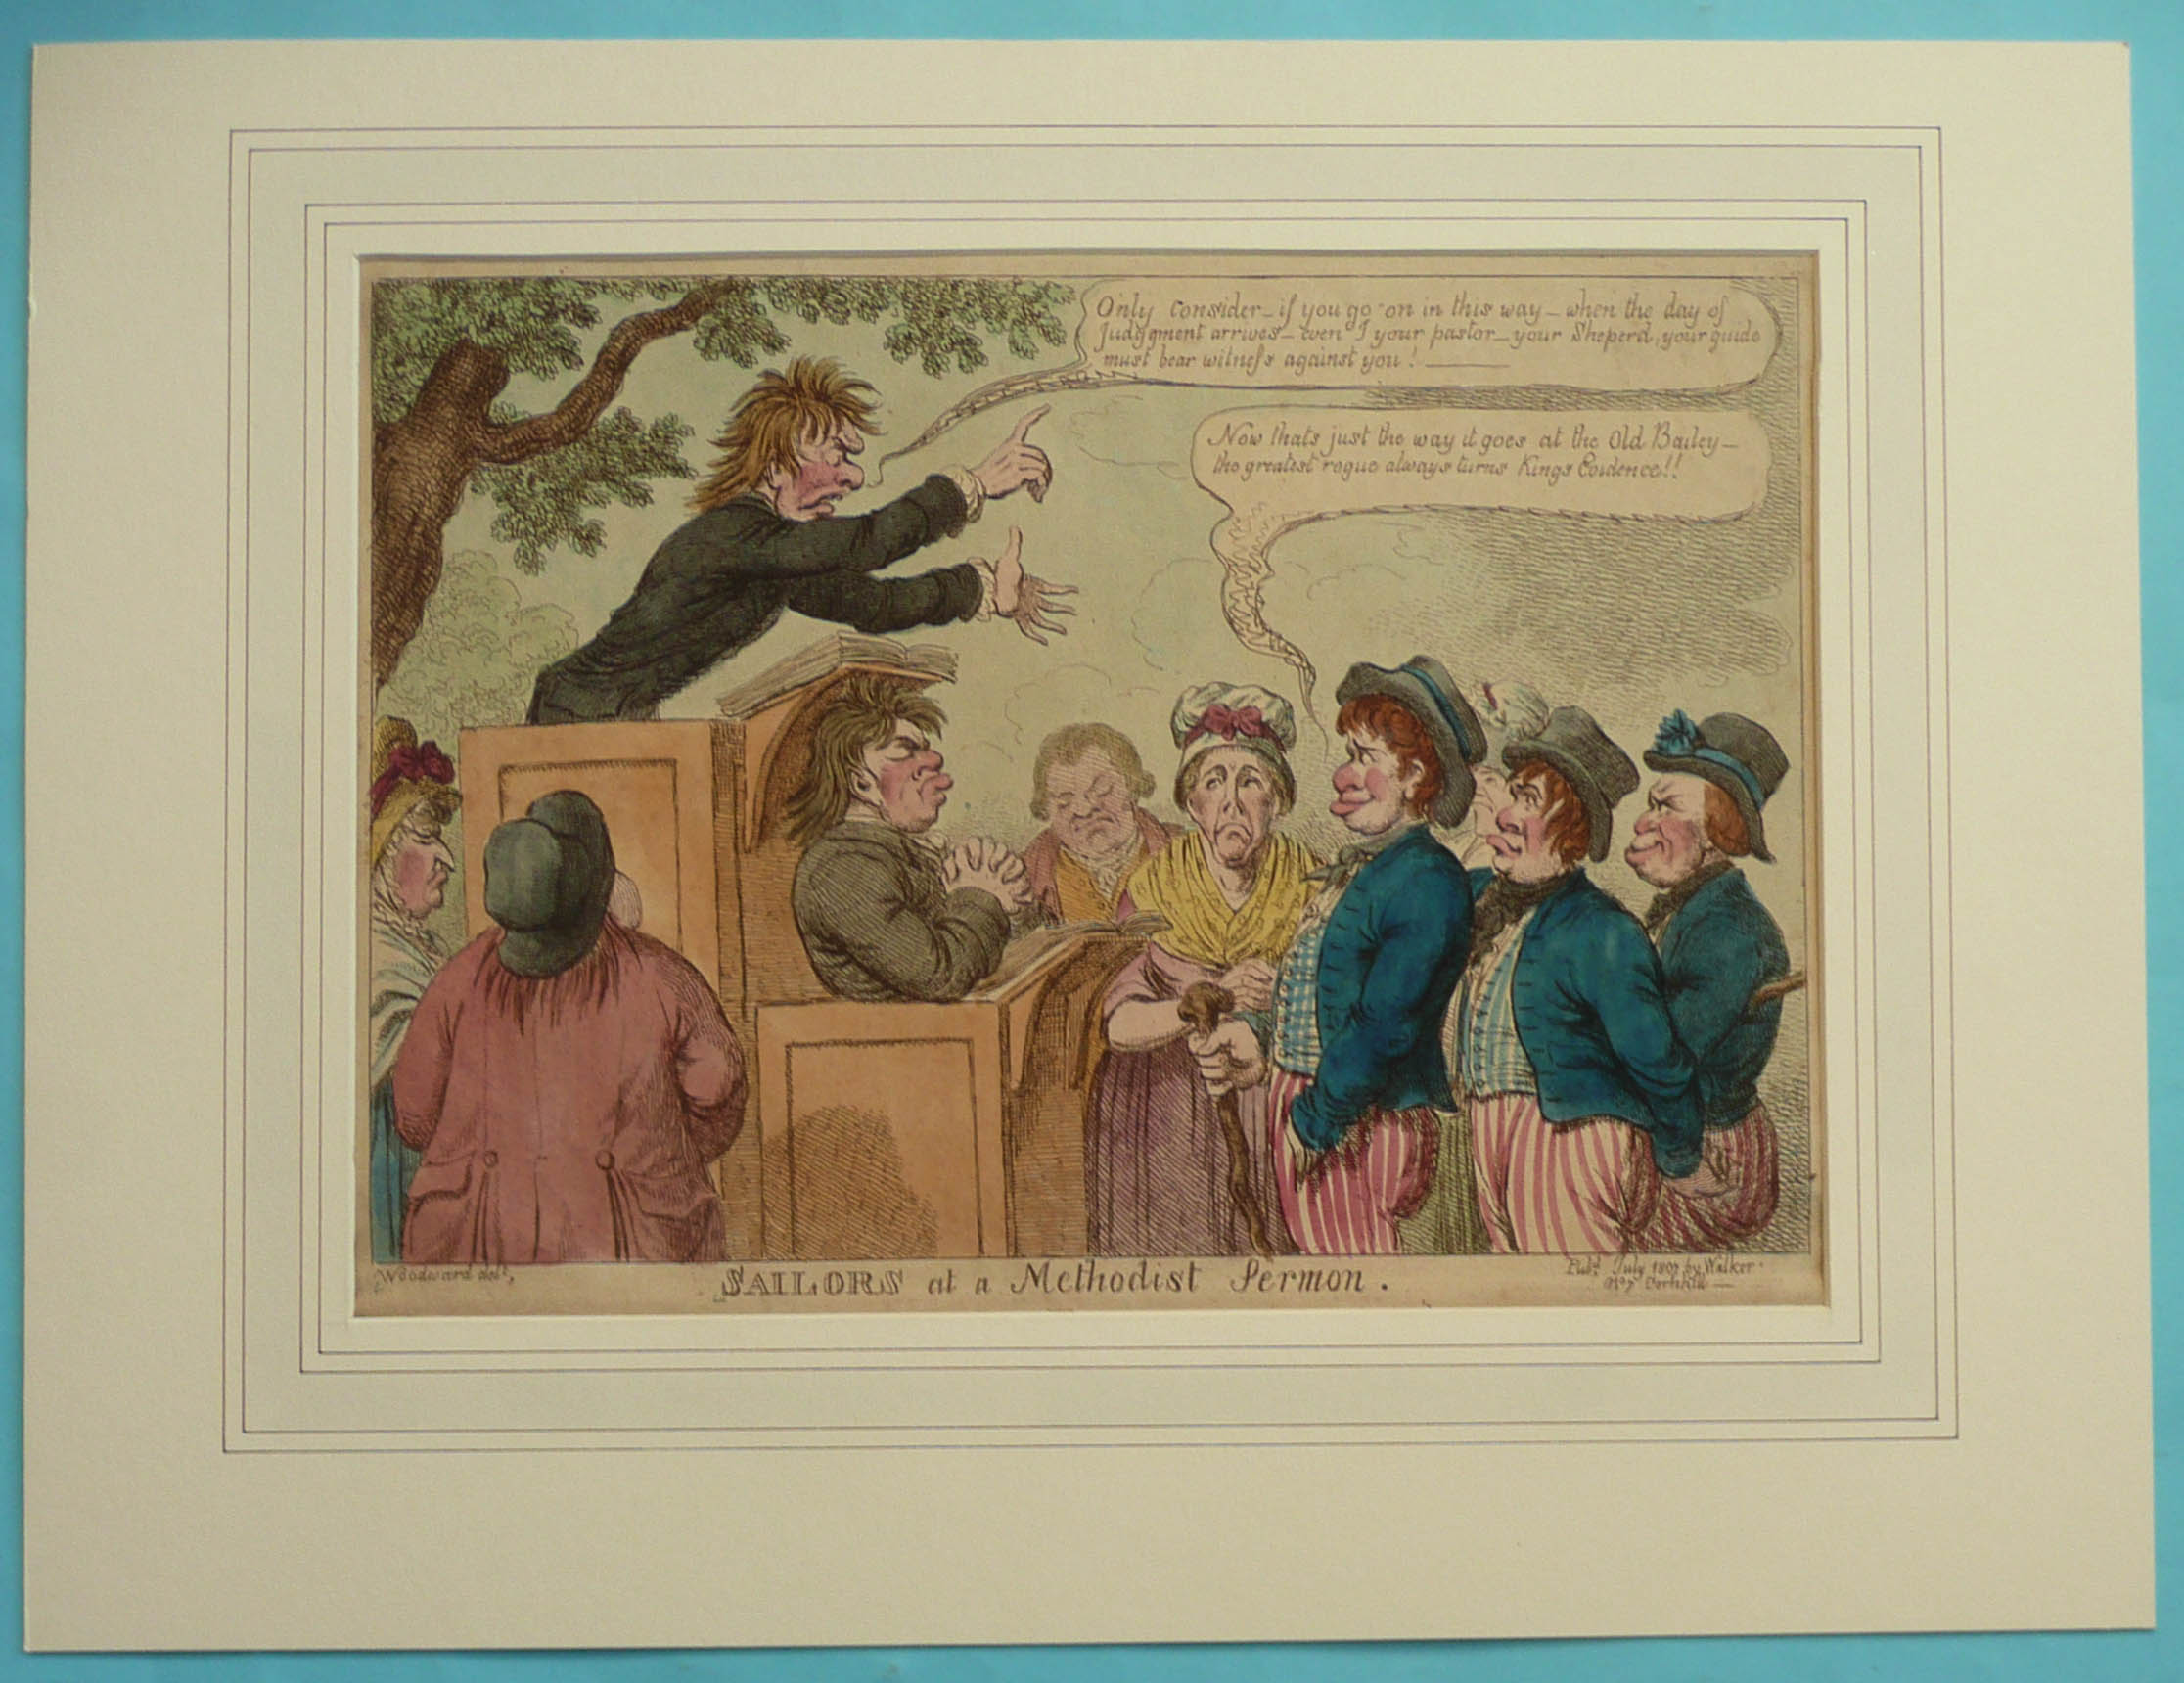 Hand coloured engravings by Woodward entitled ‘Sailors at a Methodist Sermon’ published by Walker